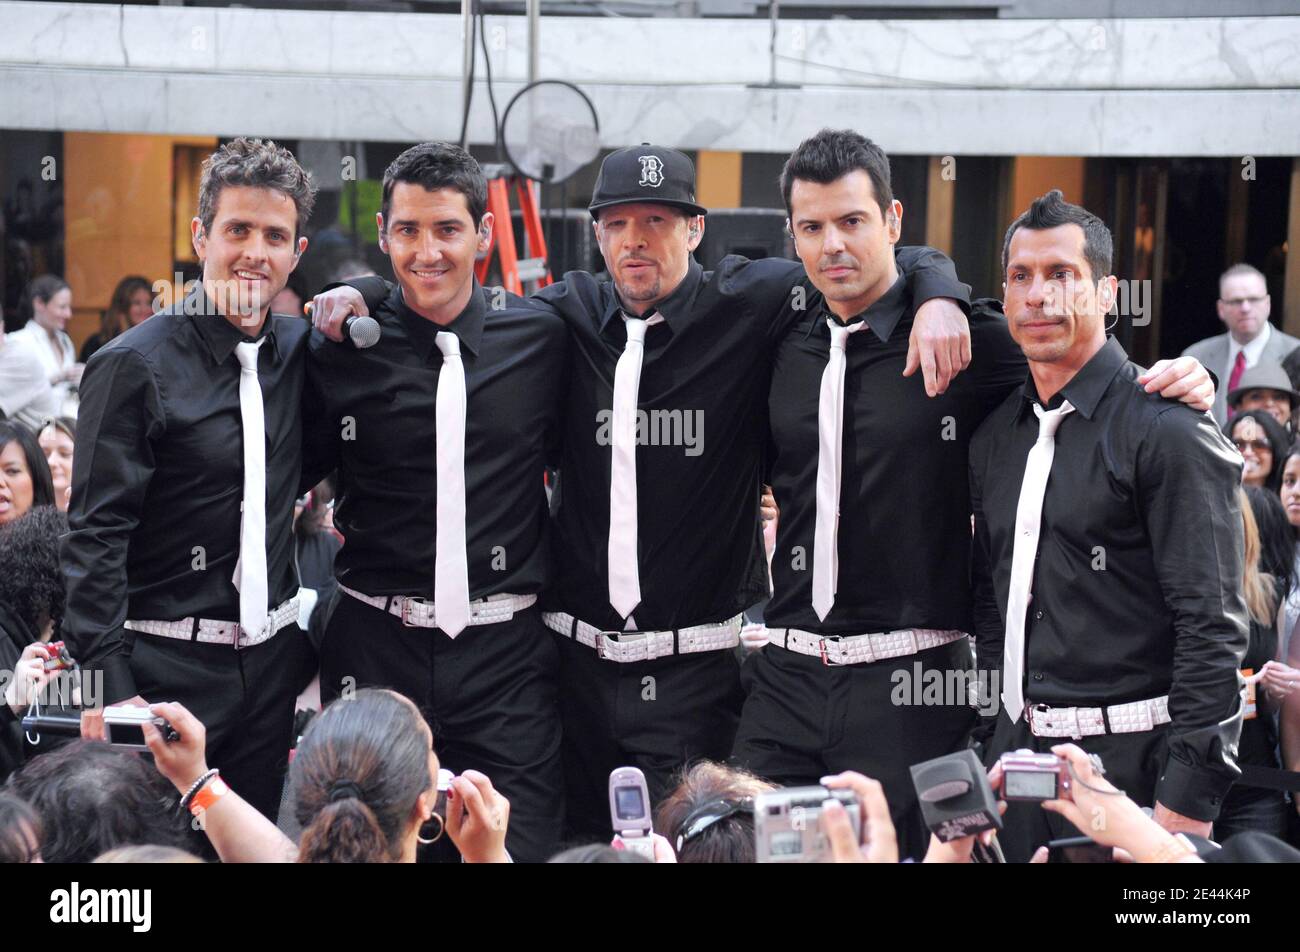 (L-R) Singers Joey McIntyre, Jonathan Knight, Donnie Wahlberg, Jordan Knight and Danny Wood of New Kids On The Block perform on NBC's 'Today' Show Concert Series at Rockefeller Plaza in New York City, NY, USA on May 8, 2009. Photo by Gregorio Binuya/ABACAPRESS.COM (Pictured: Joey McIntyre, Jonathan Knight, Donnie Wahlberg, Jordan Knight, Danny Wood, New Kids On The Block) Stock Photo